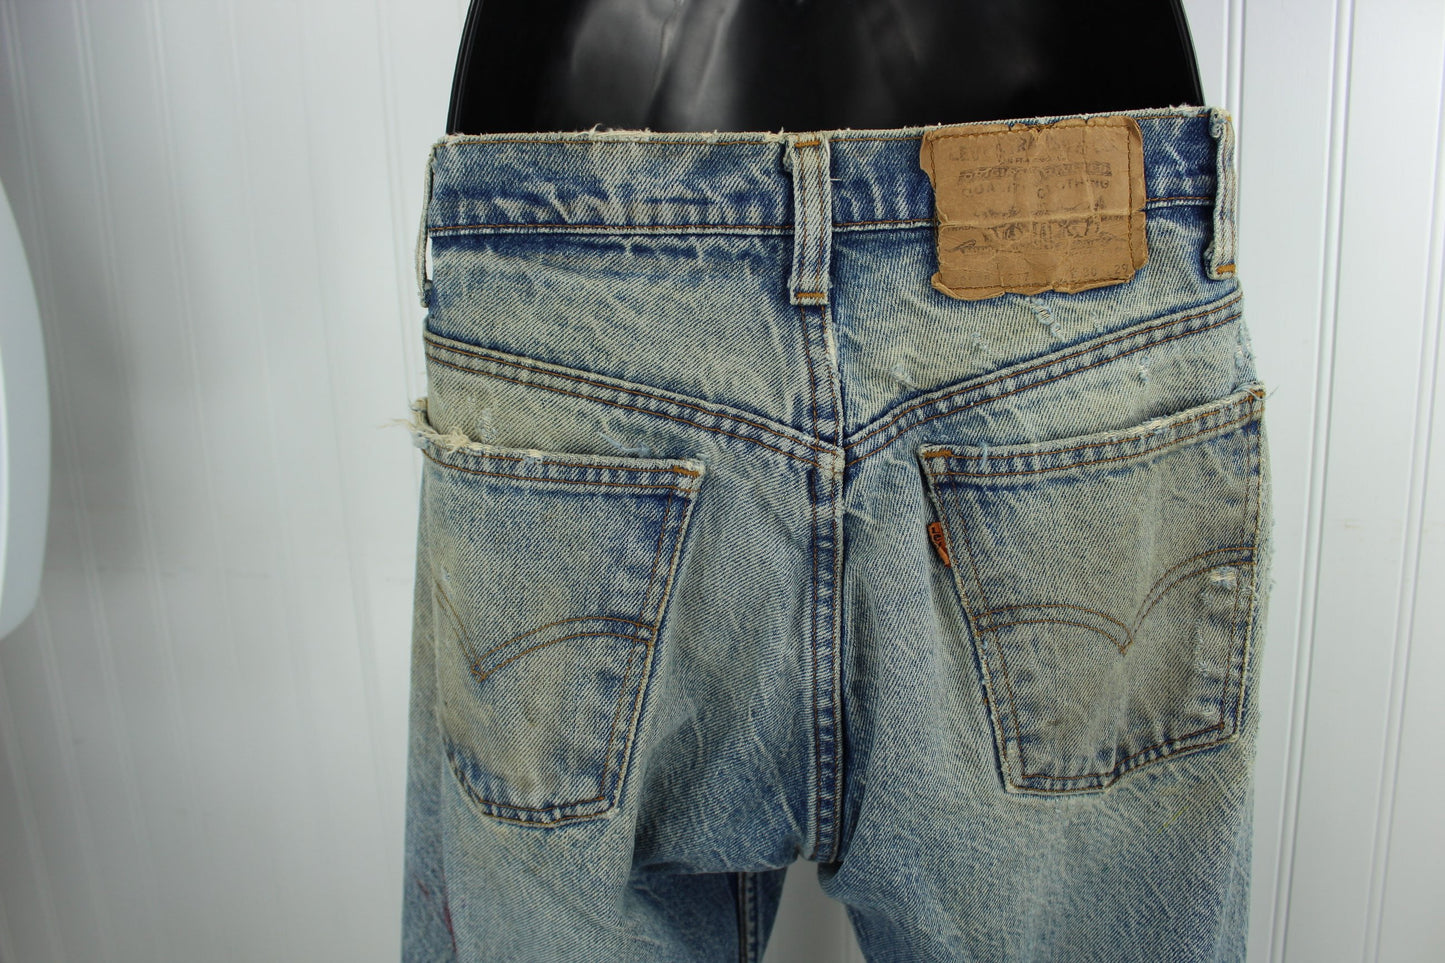 Vintage Levi's Skate Boarder Superbly Distressed Painted Jeans - Early 1990s - Waist 30" Orange Tab only one like them